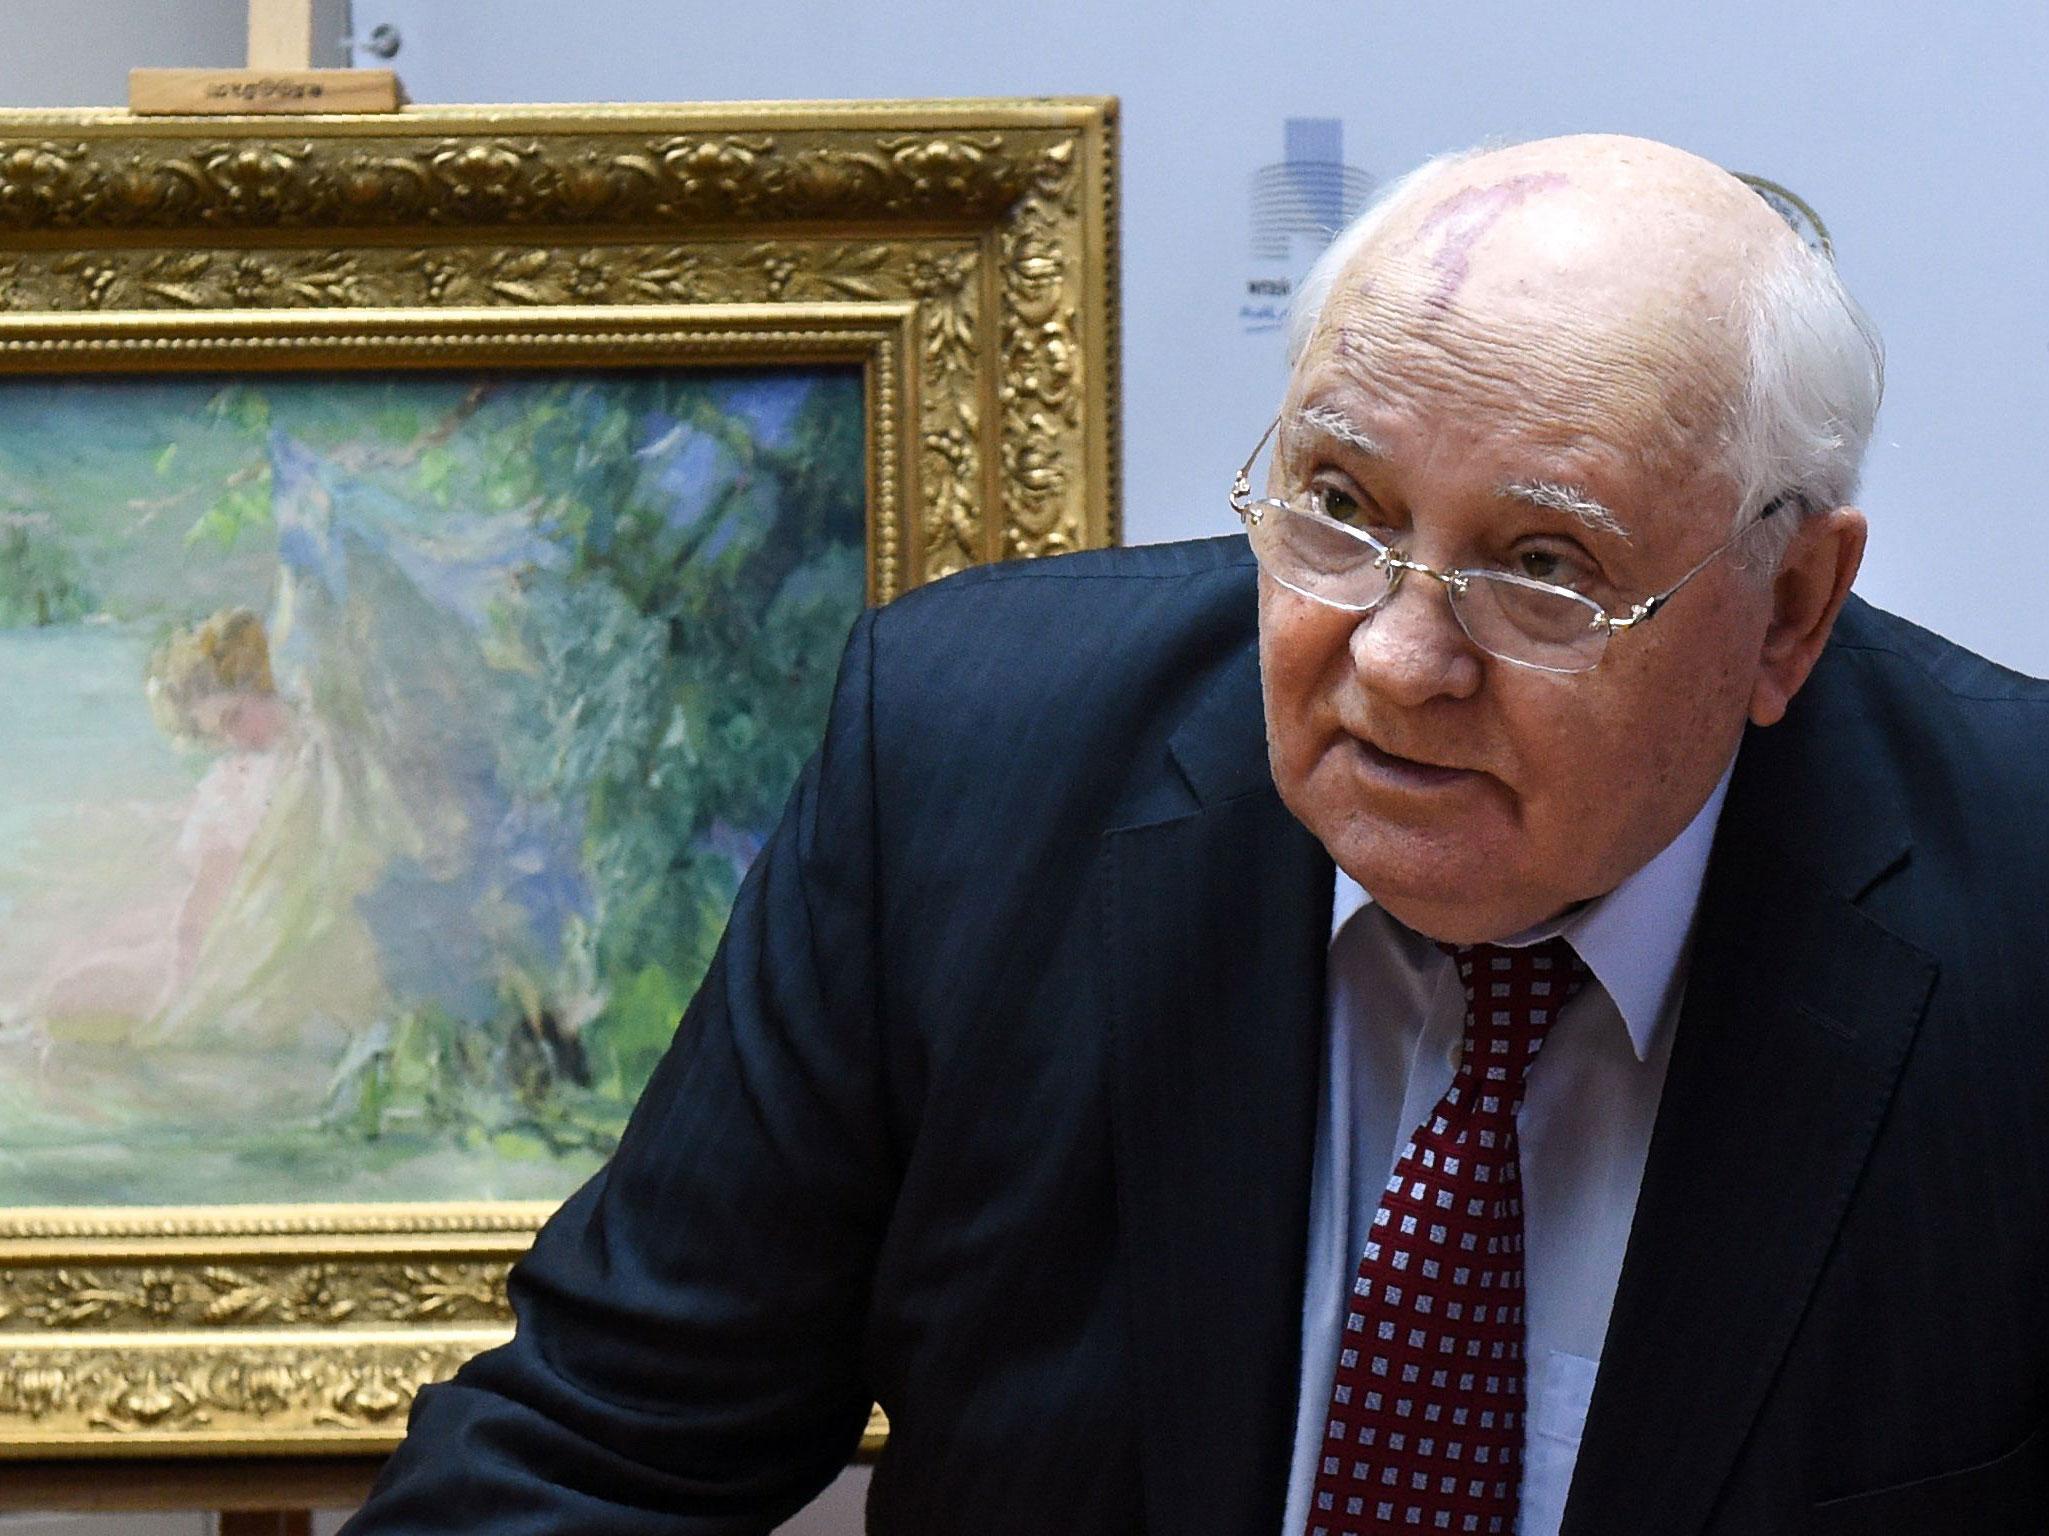 Mikhail Gorbachev, pictured speaking during a ceremony to hand over three Russian paintings, talked of the nuclear disarmament of the 1980s